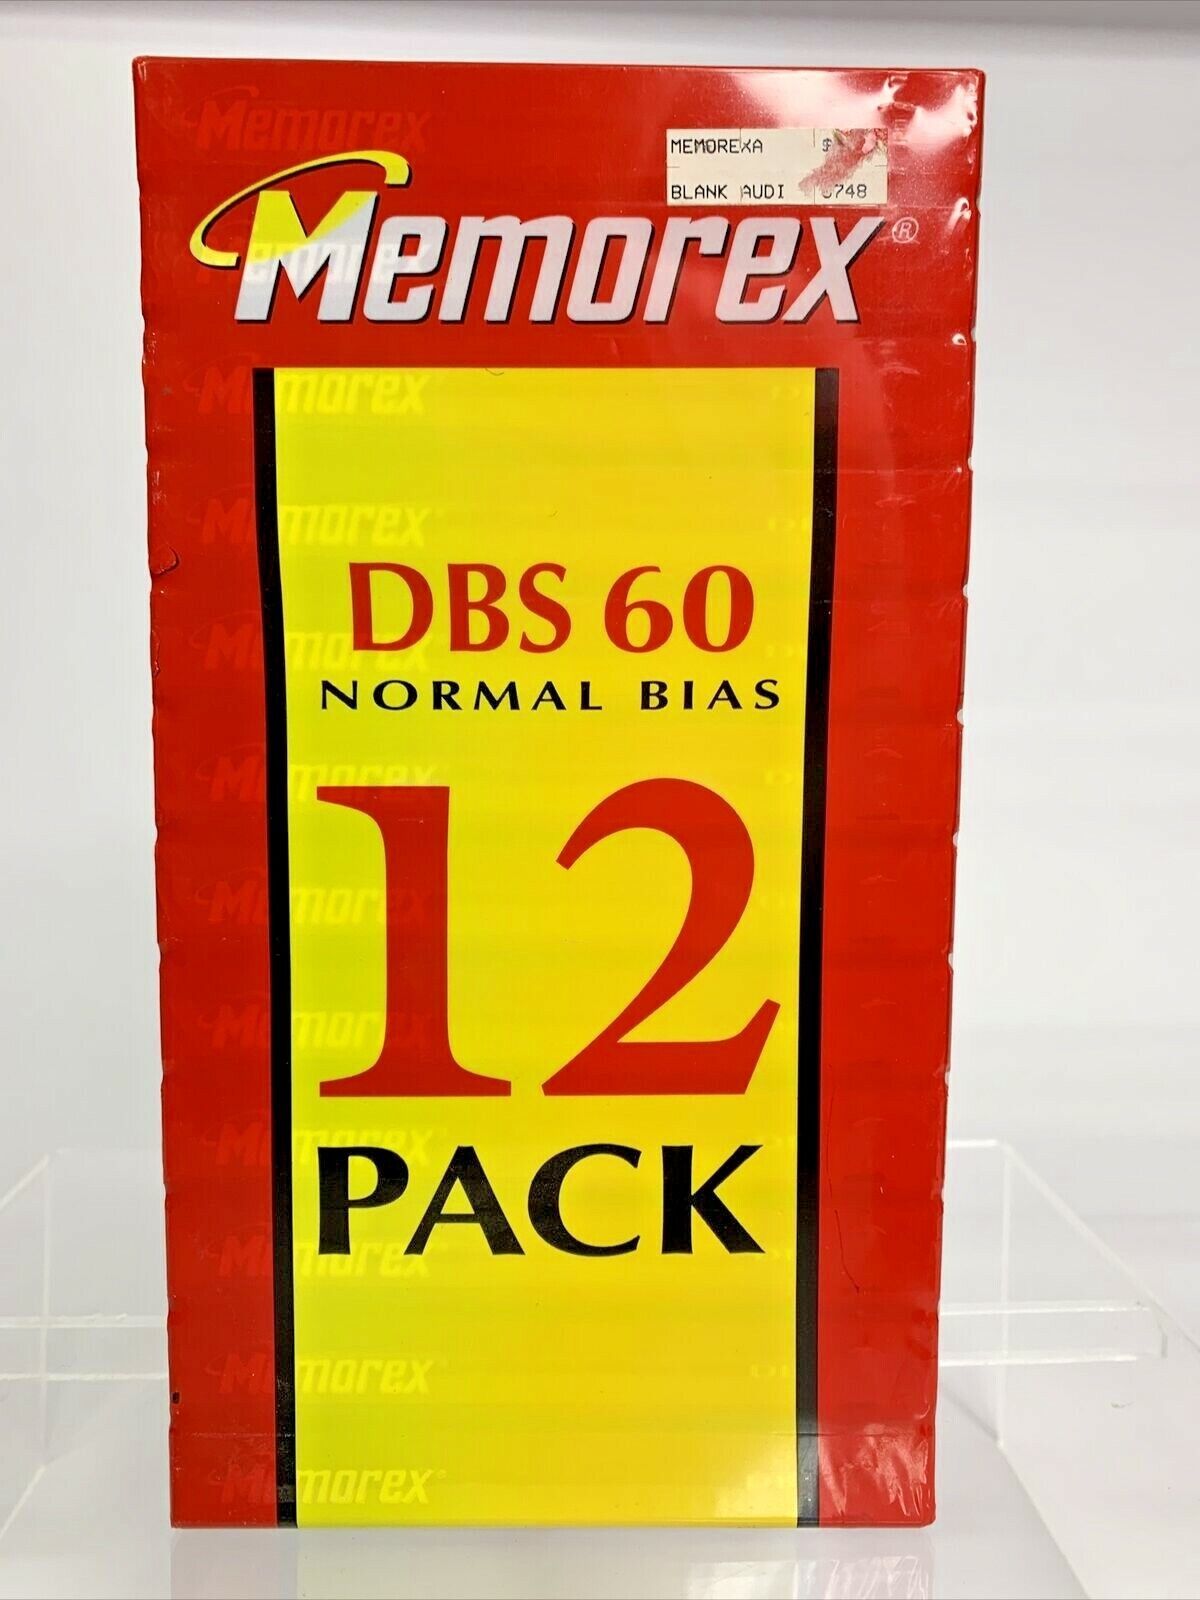 Primary image for Memorex DBS 90 Normal Bias 12 Pack Audio Cassettes NEW Type 1 Blank Media